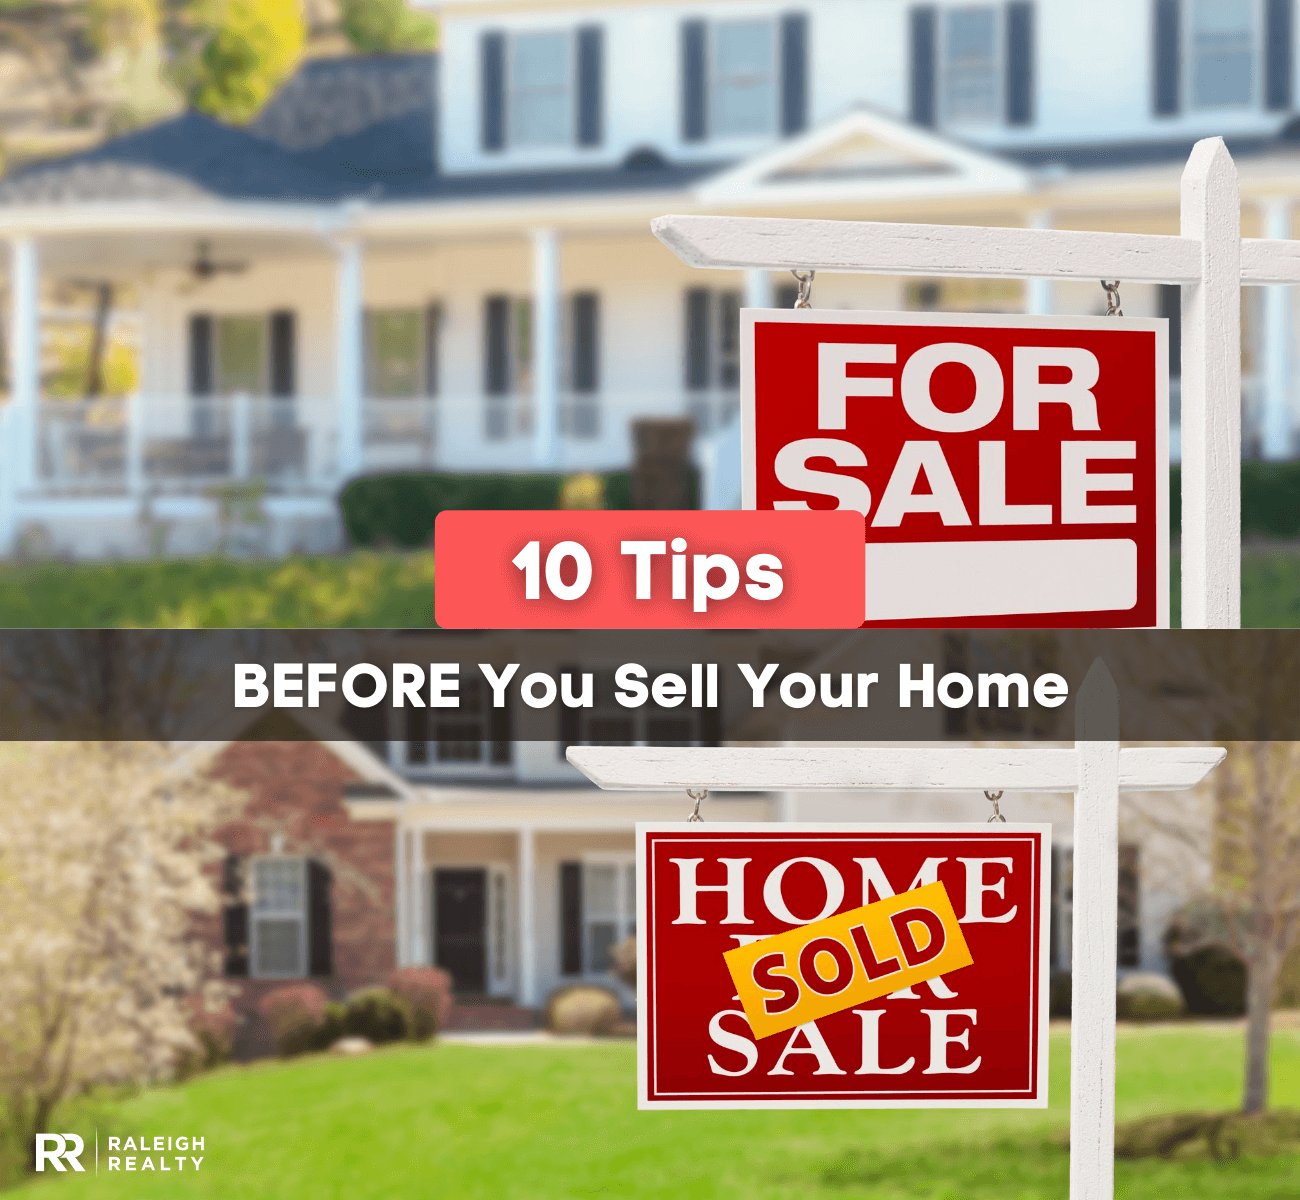 10 Real Estate Tips BEFORE You Sell Your Home